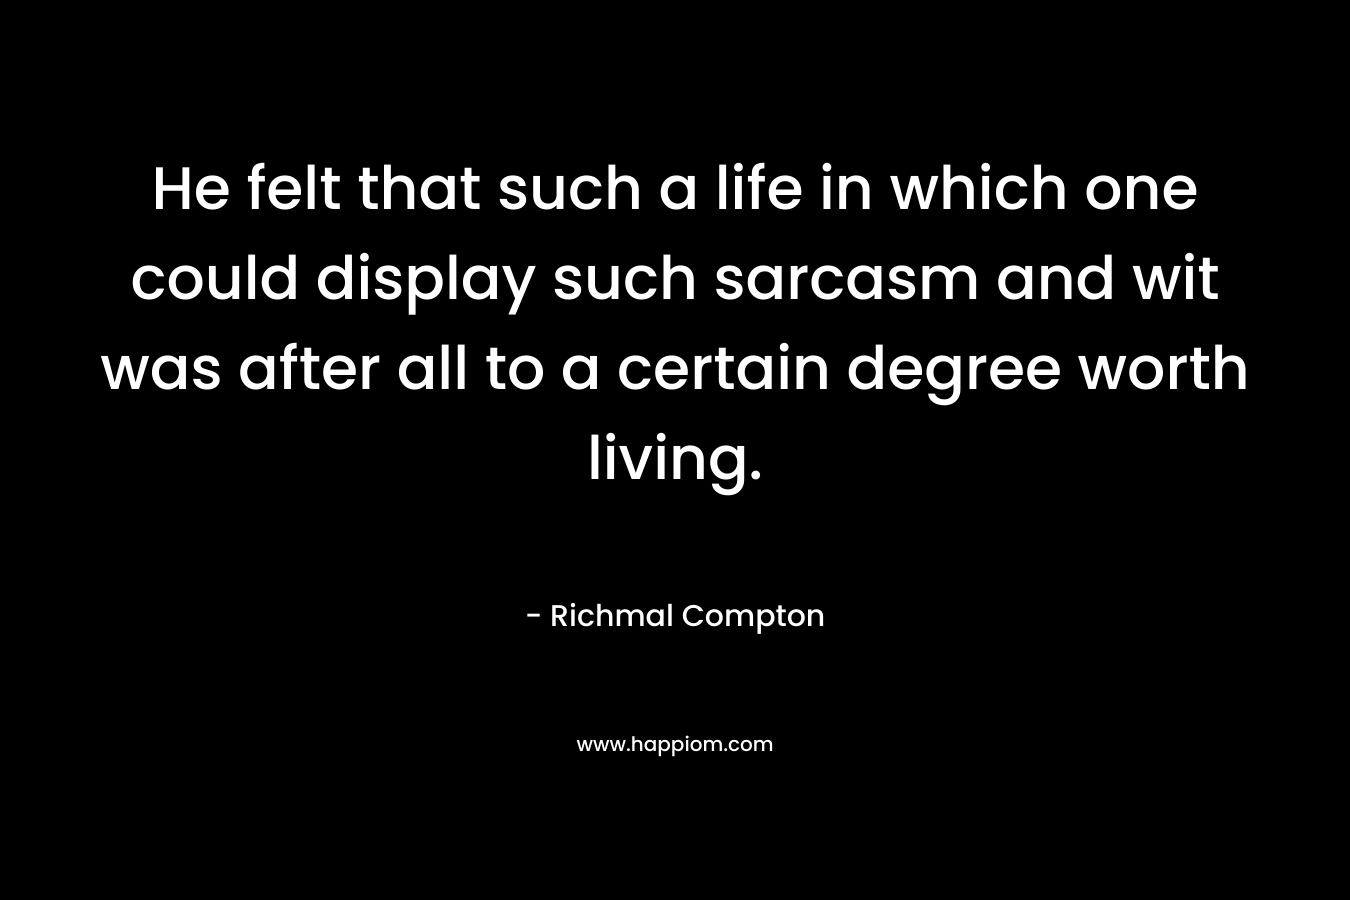 He felt that such a life in which one could display such sarcasm and wit was after all to a certain degree worth living. – Richmal Compton